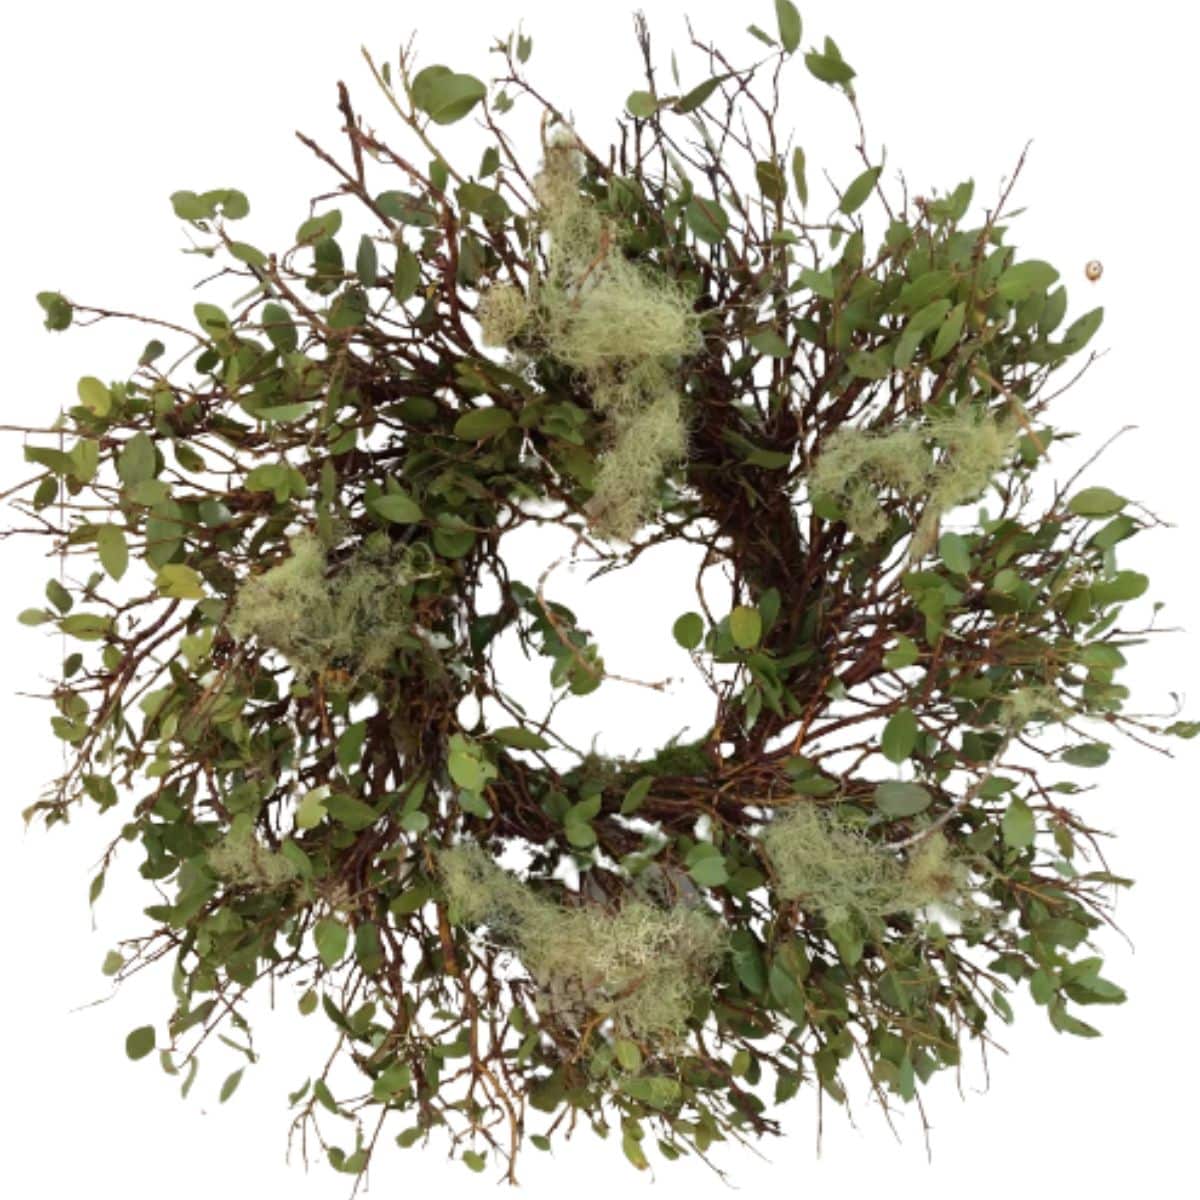 wreath made of Manzanita and Lichen branches, along with moss from etsy